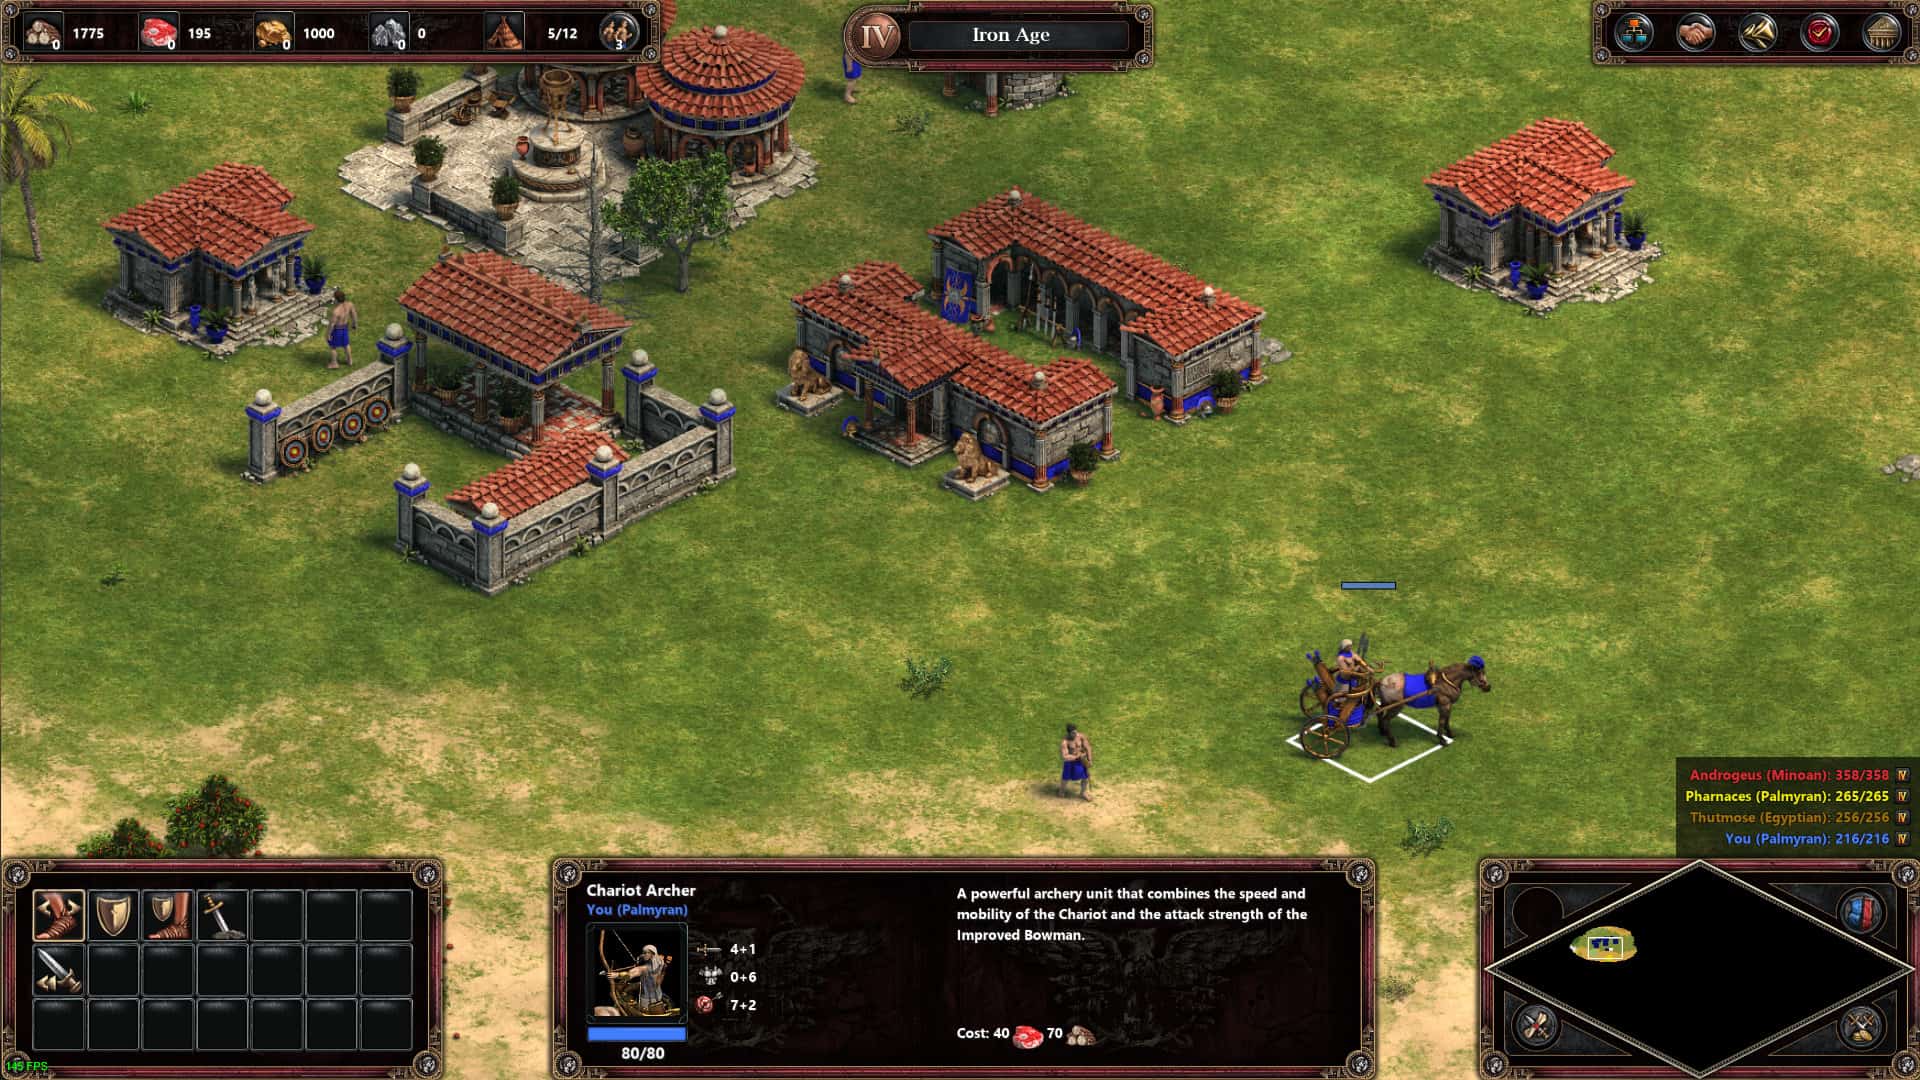 Different archer units in a game of Age of Empires: Definitive Edition.